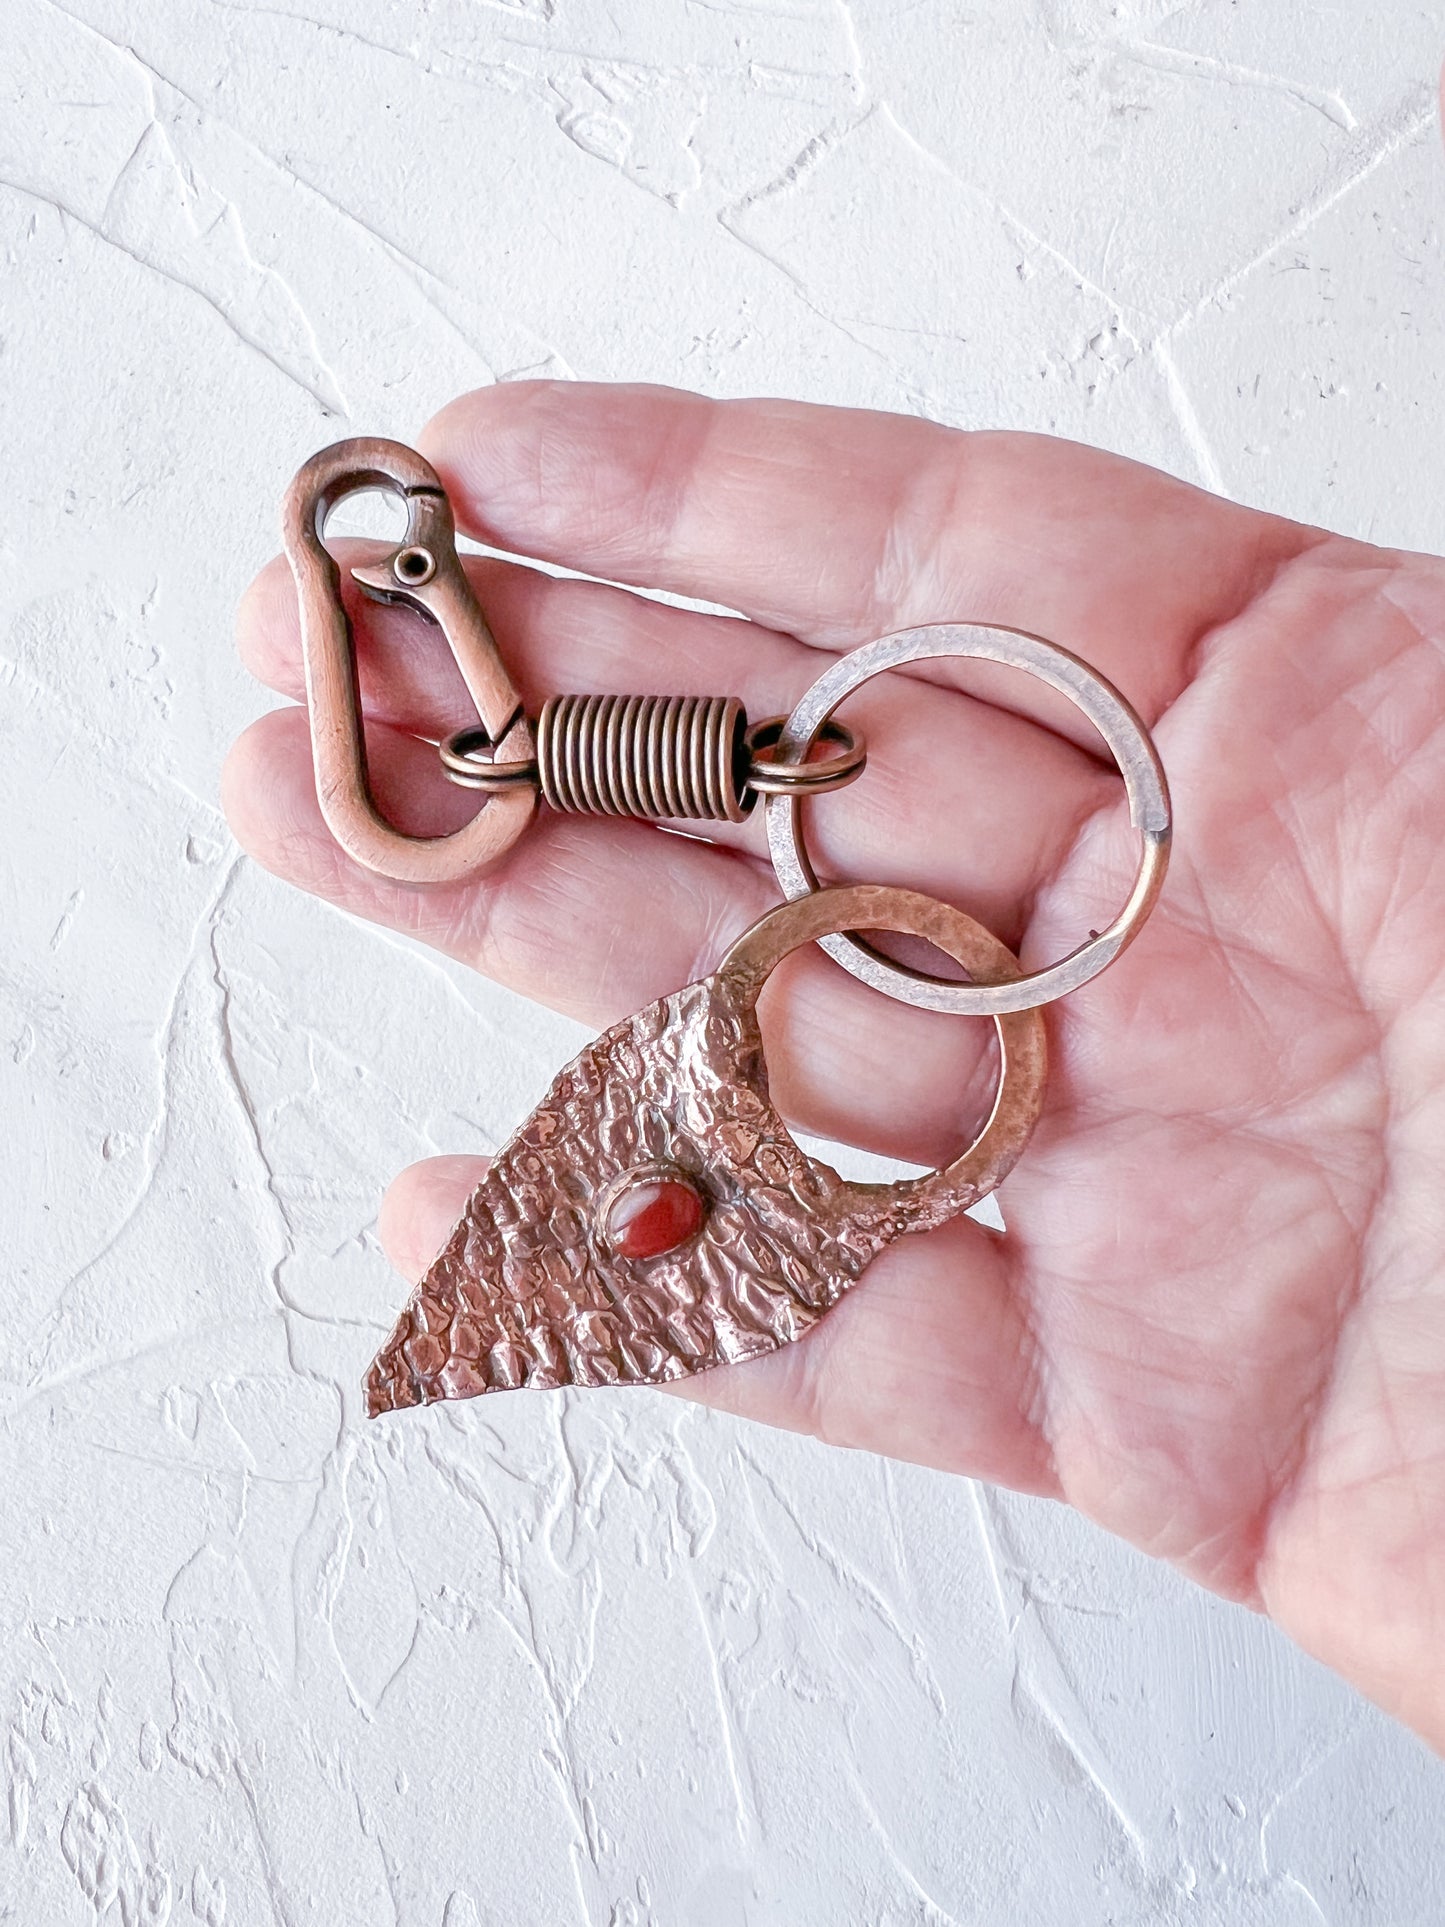 Copper Organic Snakeskin Shed Keyring with Onyx Accent